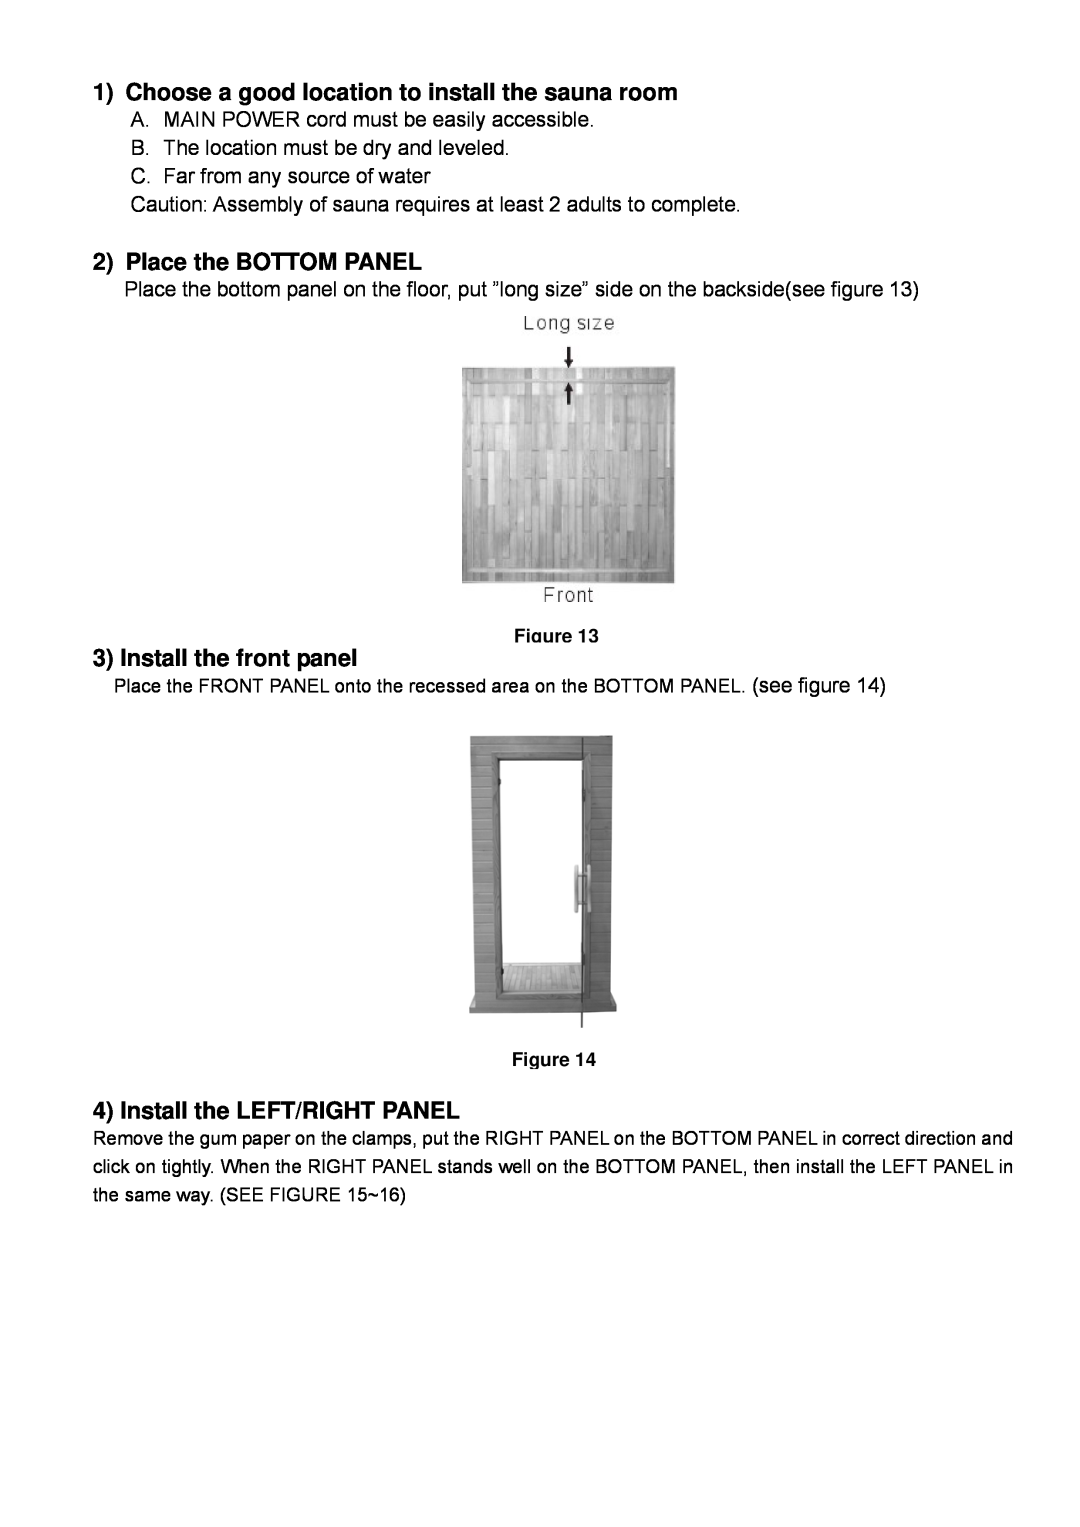 Keys Fitness BS-9101 1Choose a good location to install the sauna room, Place the BOTTOM PANEL, Install the front panel 